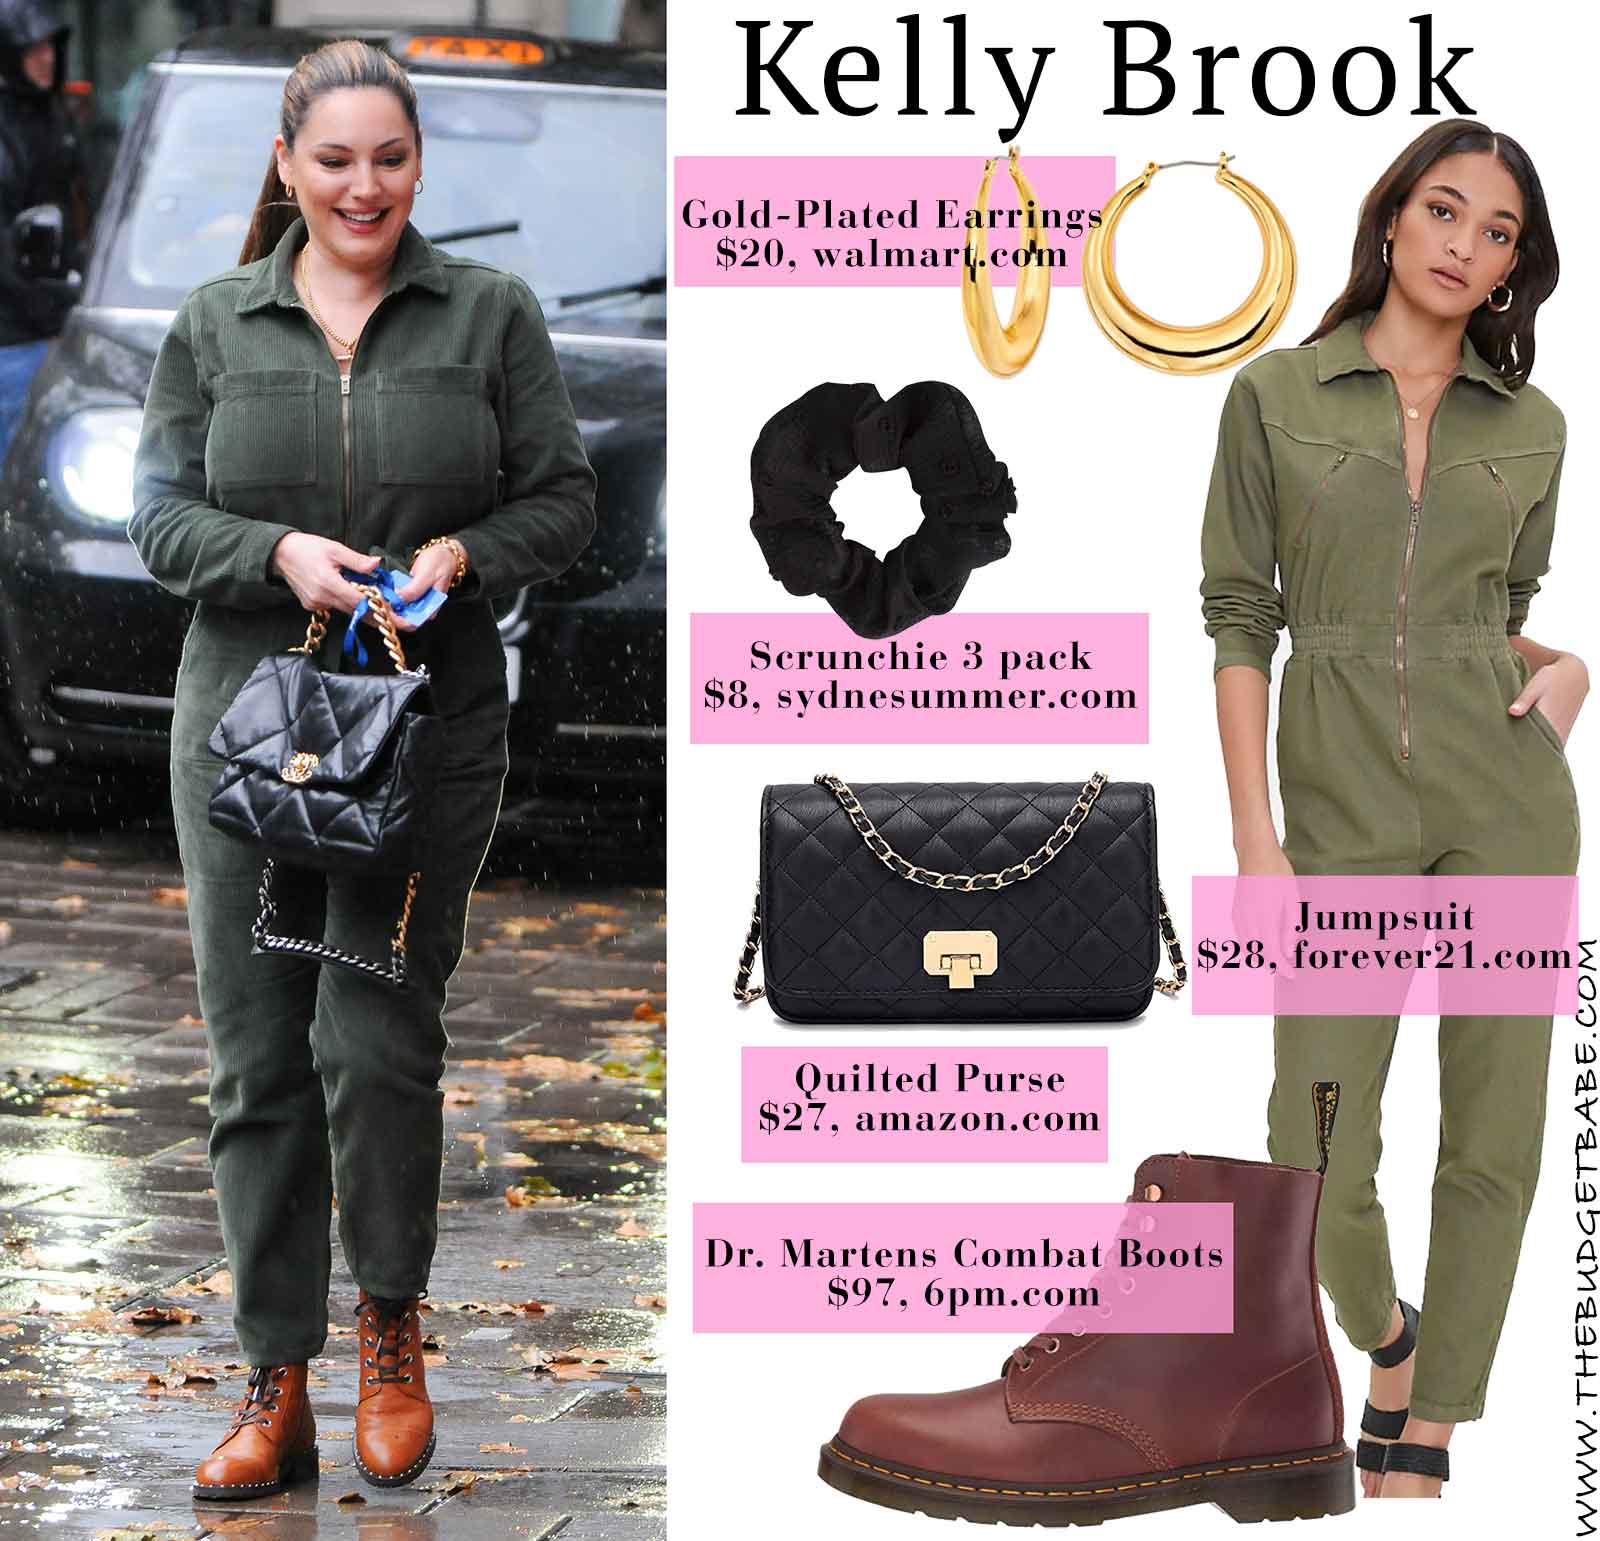 Kelly Brook's boiler suit and combat boots